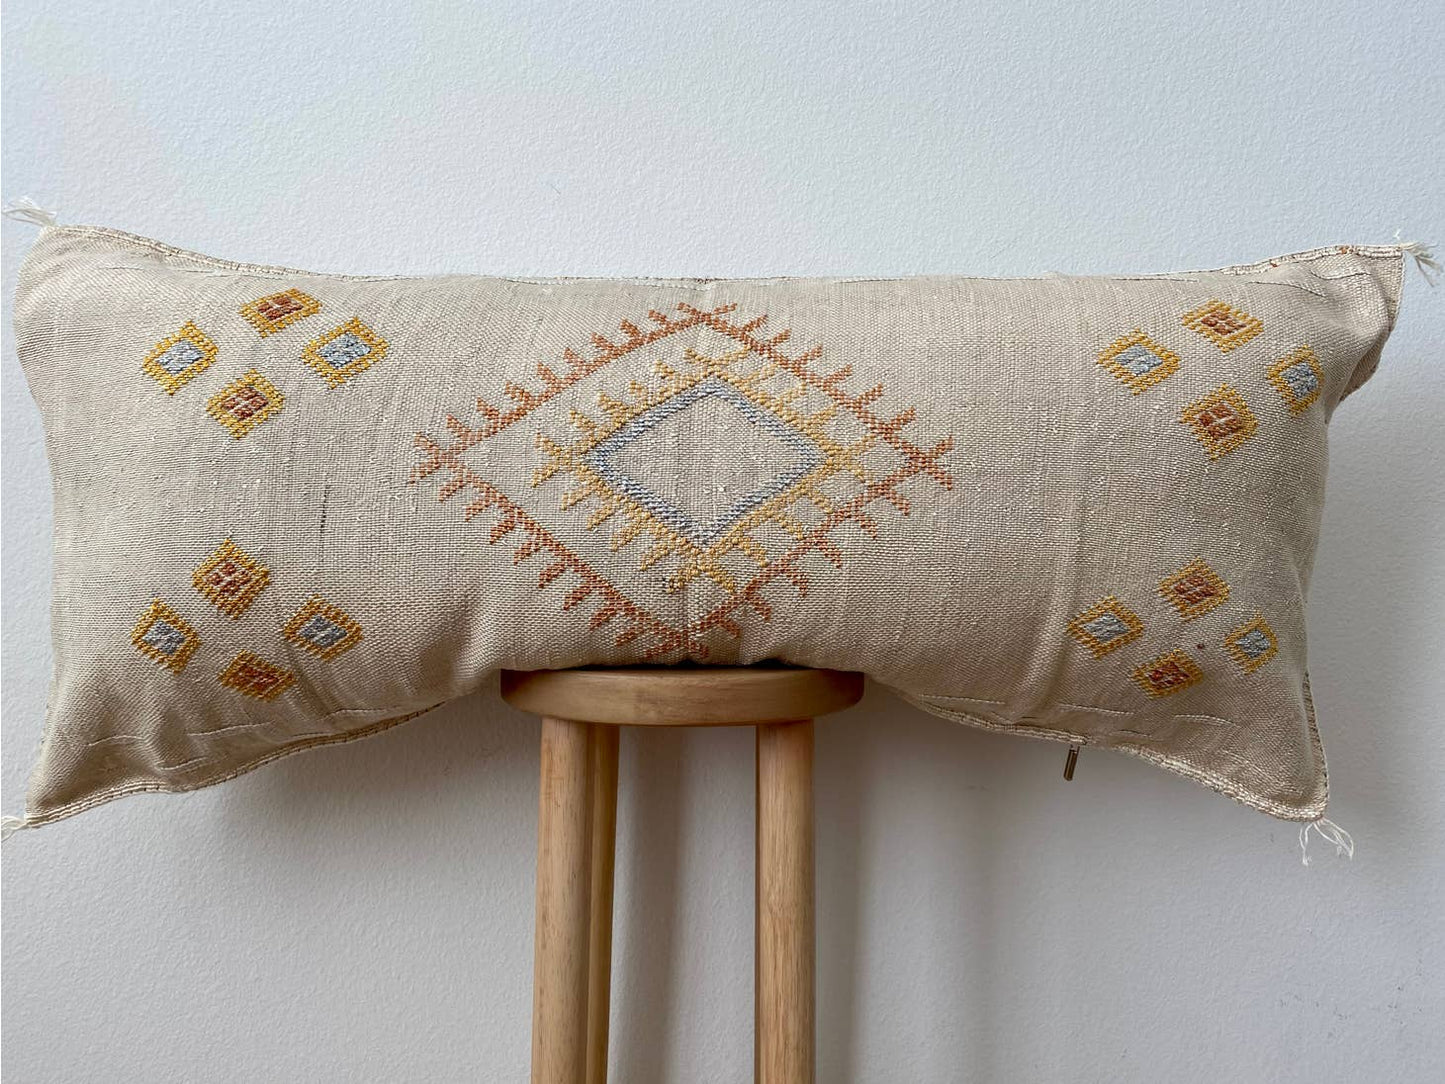 One-of-a-kind Sabra bolster pillow made with a natural silk fiber from the agave cactus plant. Features hand-stitched embroidery. Each of these pillows is one-of-a-kind, meaning that the pillow shipped will be grey but the color and designs will vary. Includes a down pillow insert.